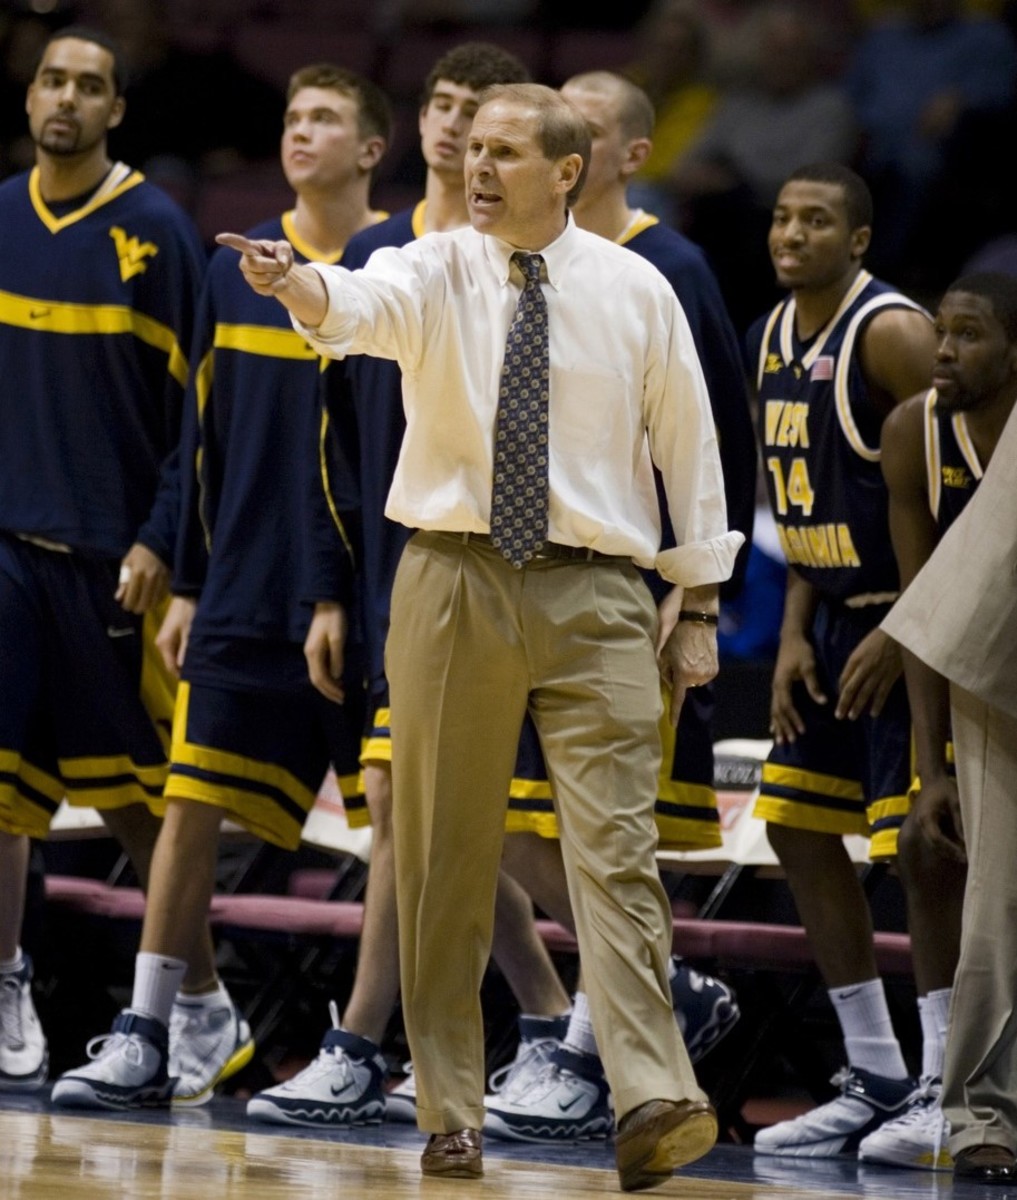 Feb 14, 2006; East Rutherford, NJ, USA; West Virginia Mountaineers head coach John Beilein during the 2nd half against the Seton Hall Pirates at the Continental Airlines Arena, East Rutherford, NJ. Seton Hall defeated West Virginia 71-64.